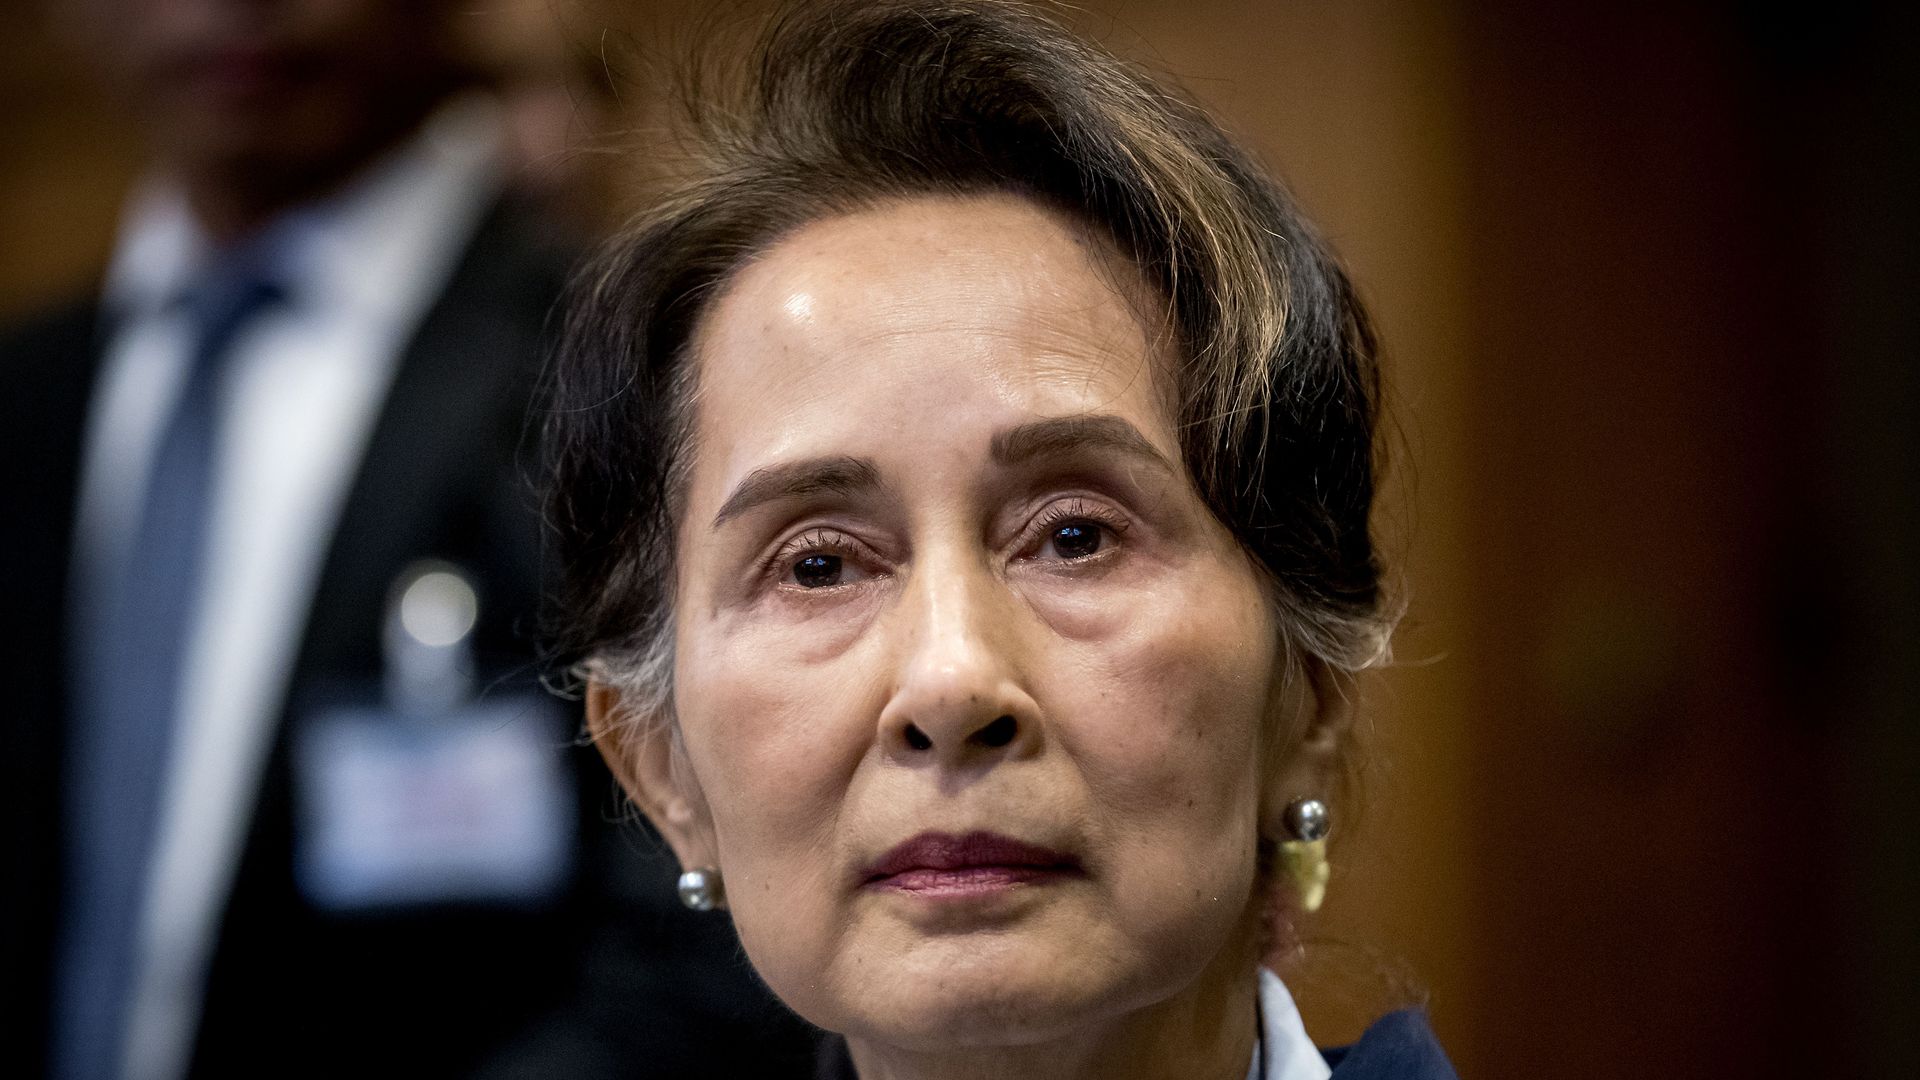 Myanmar's State Counsellor Aung San Suu Kyi looks on before the UN's International Court of Justice on December 11, 2019 in the Peace Palace of The Hague.